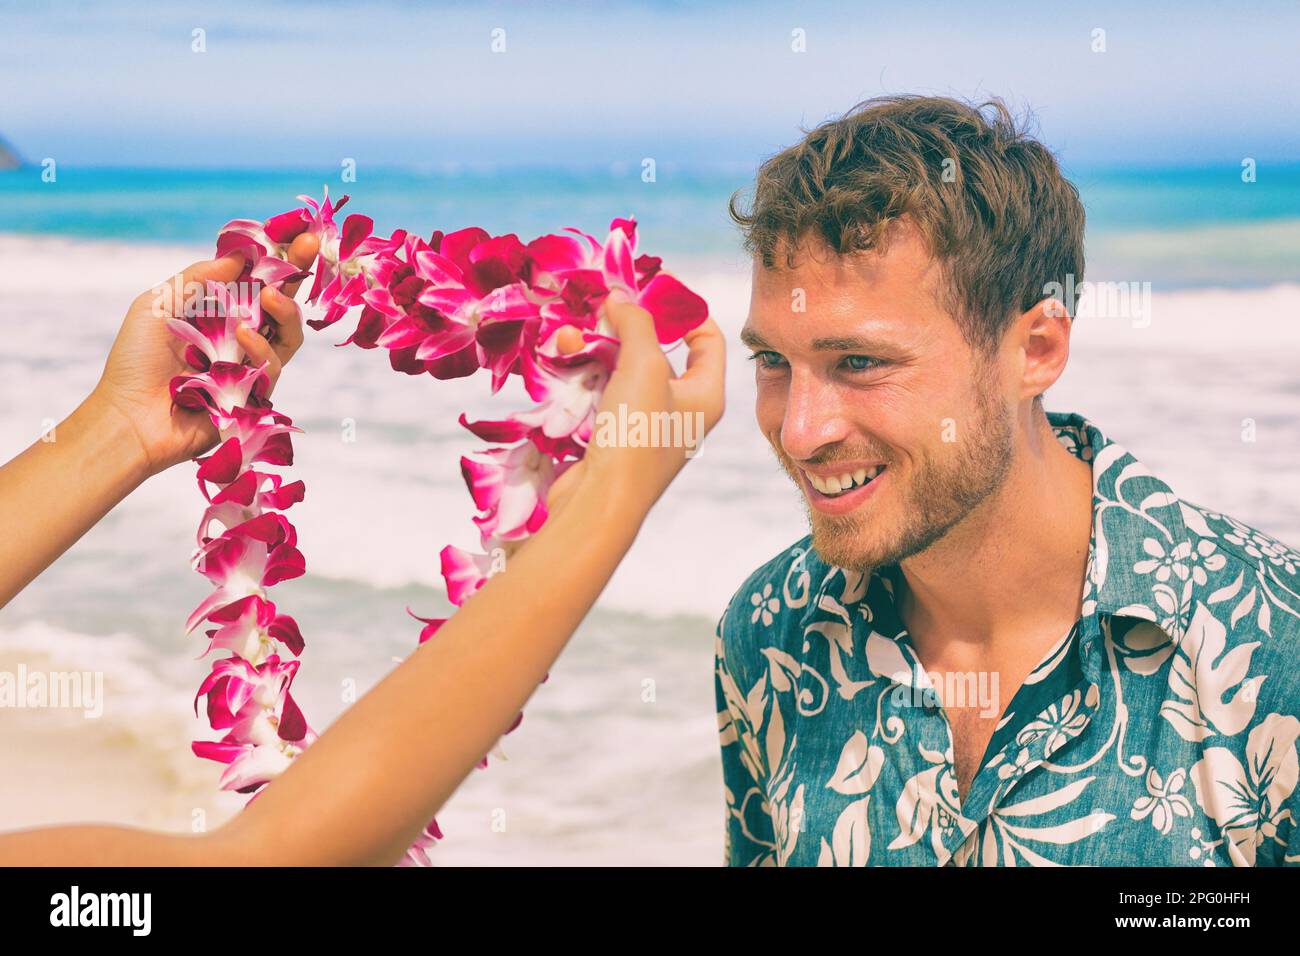 Hawaii welcome hawaiian lei flower necklace offering to tourist as welcoming gesture for luau party or beach vacation. Polynesian tradition. Stock Photo